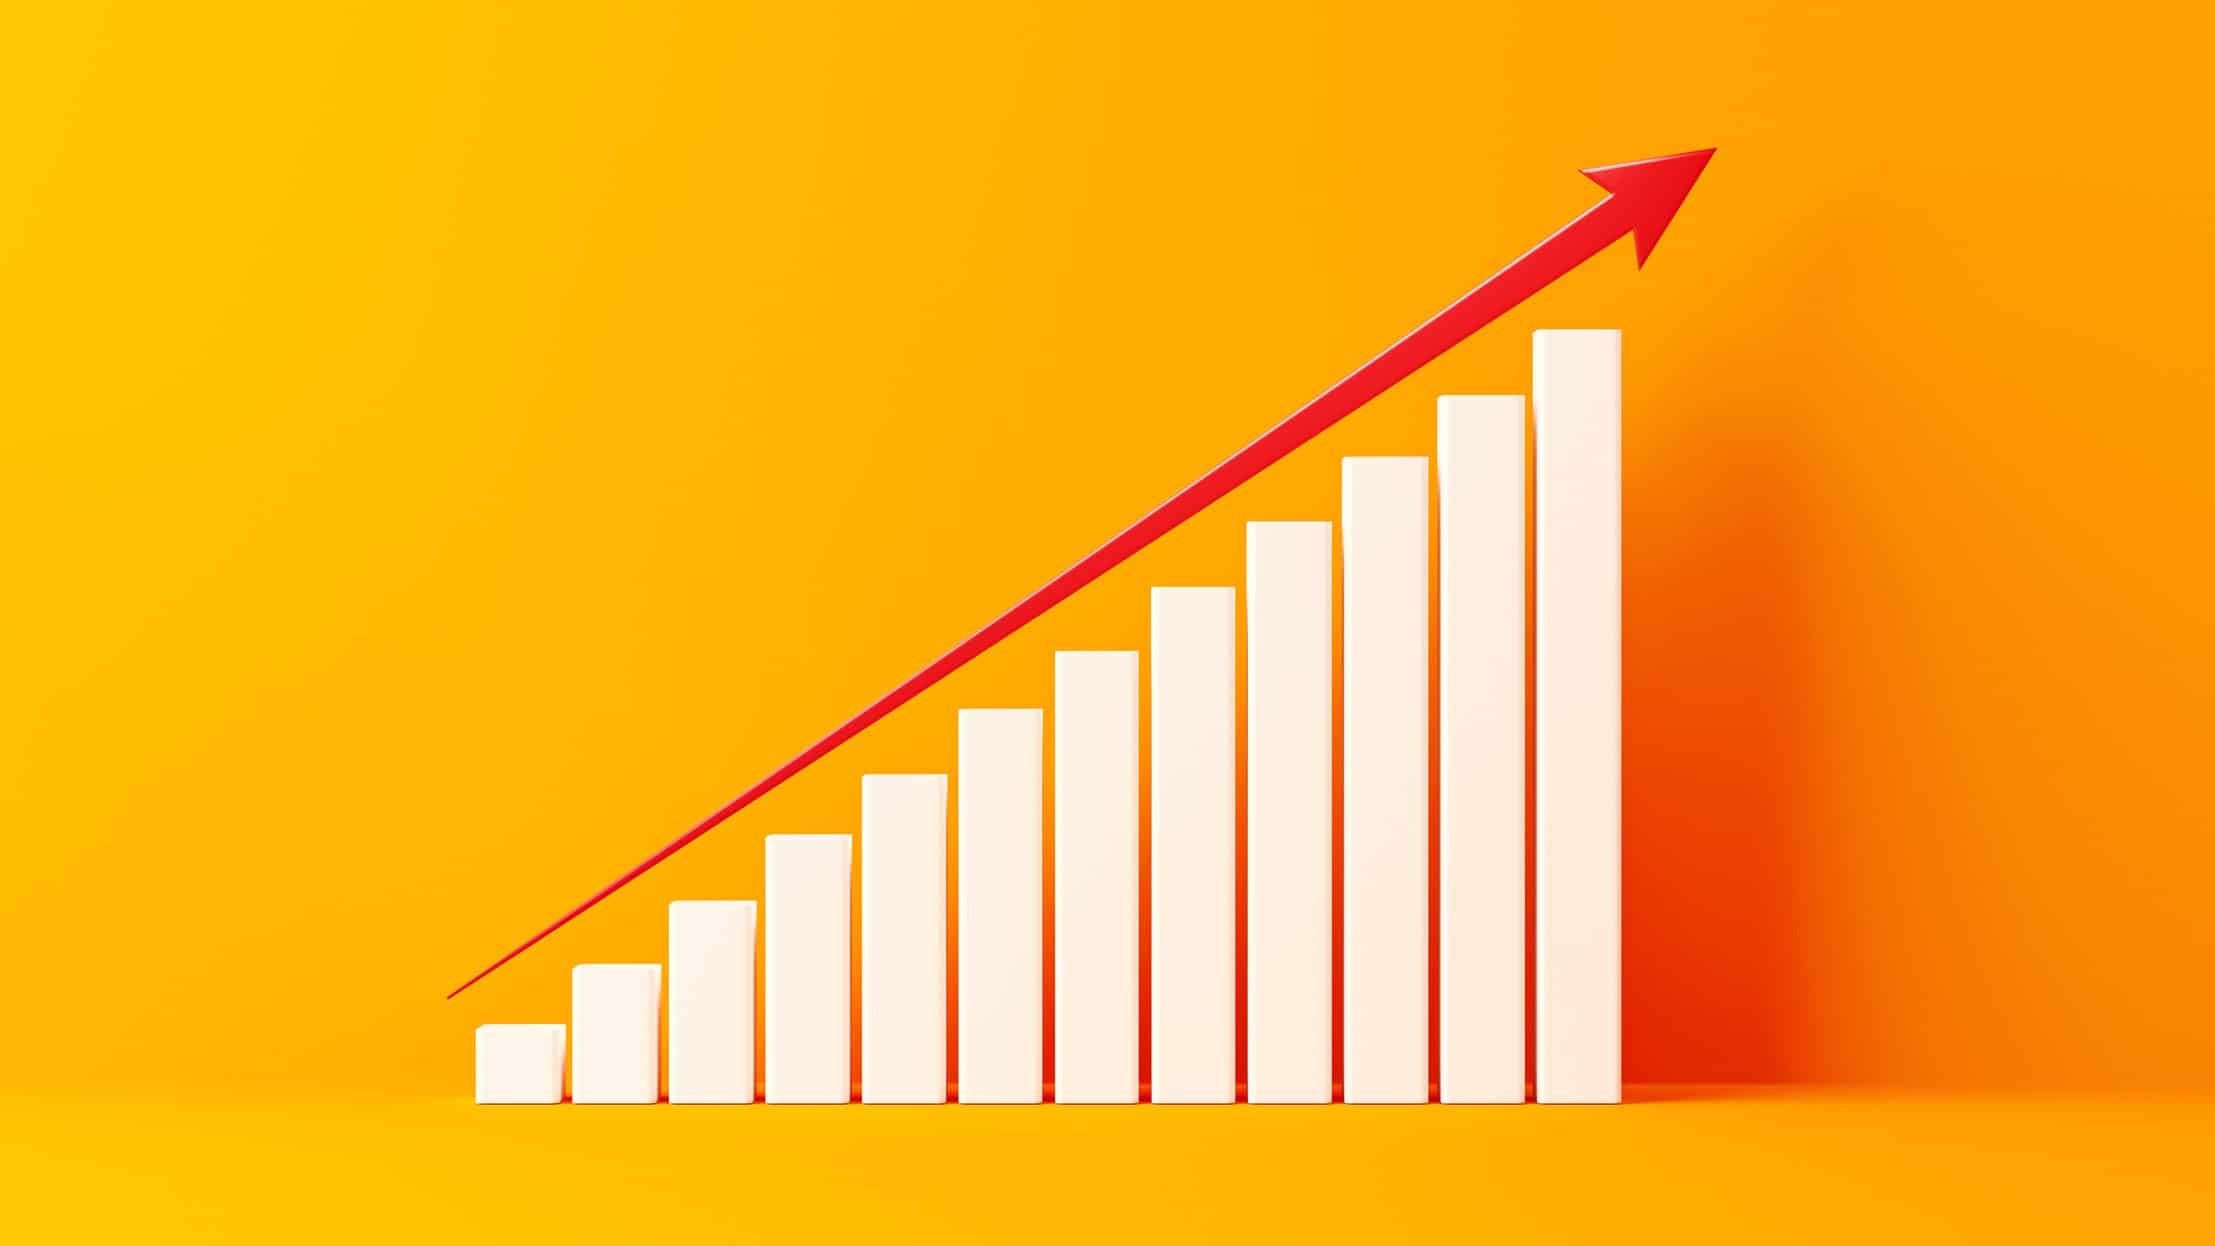 Increasing white bar graph with a rising arrow on an orange background.